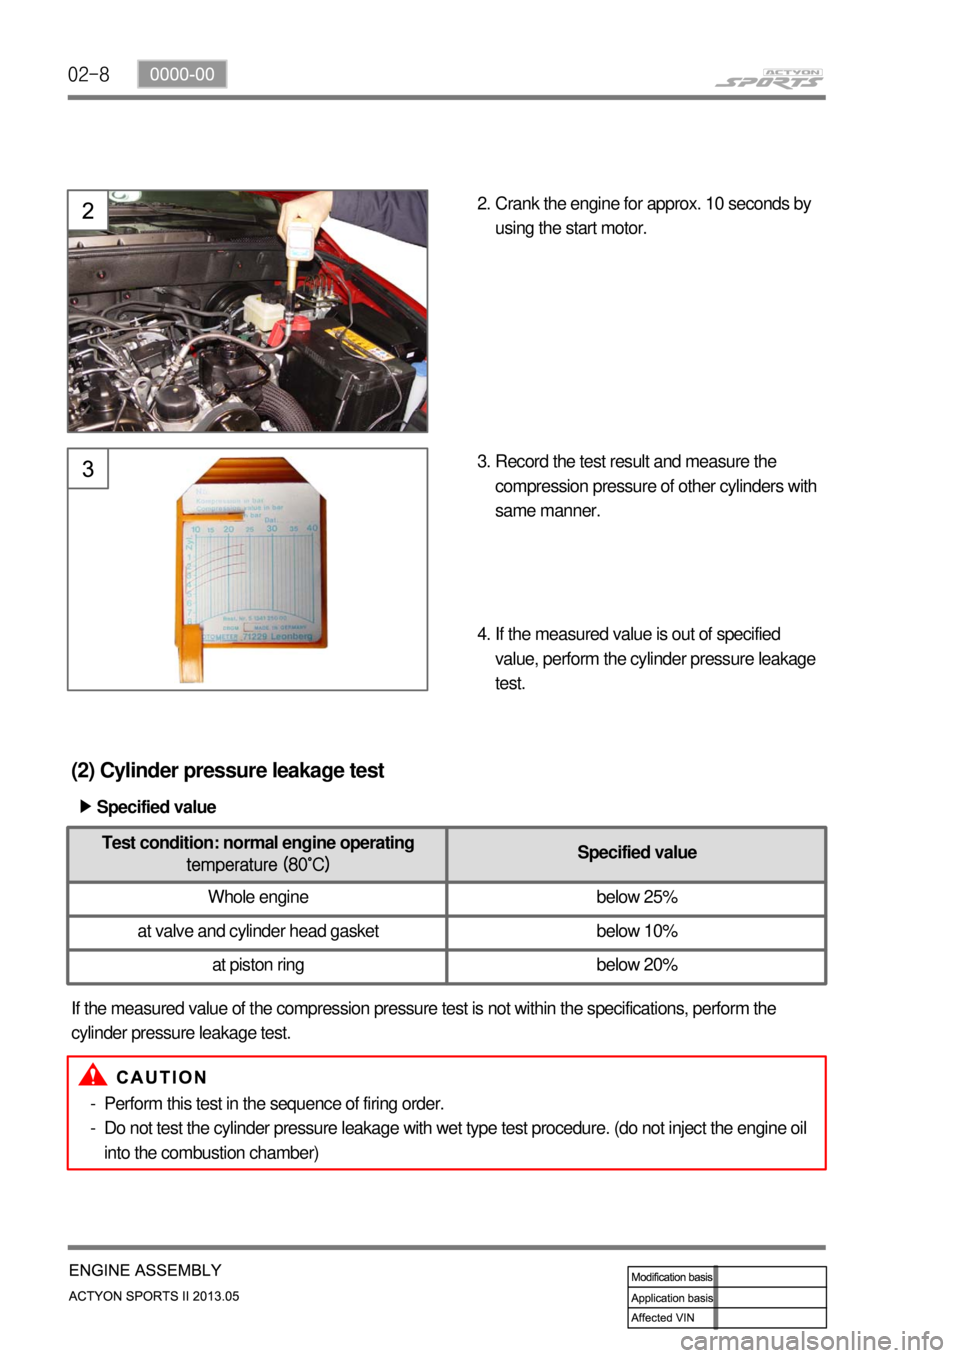 SSANGYONG NEW ACTYON SPORTS 2013 Owners Guide 02-8
(2) Cylinder pressure leakage test
If the measured value of the compression pressure test is not within the specifications, perform the 
cylinder pressure leakage test.Specified value ▶
Perform